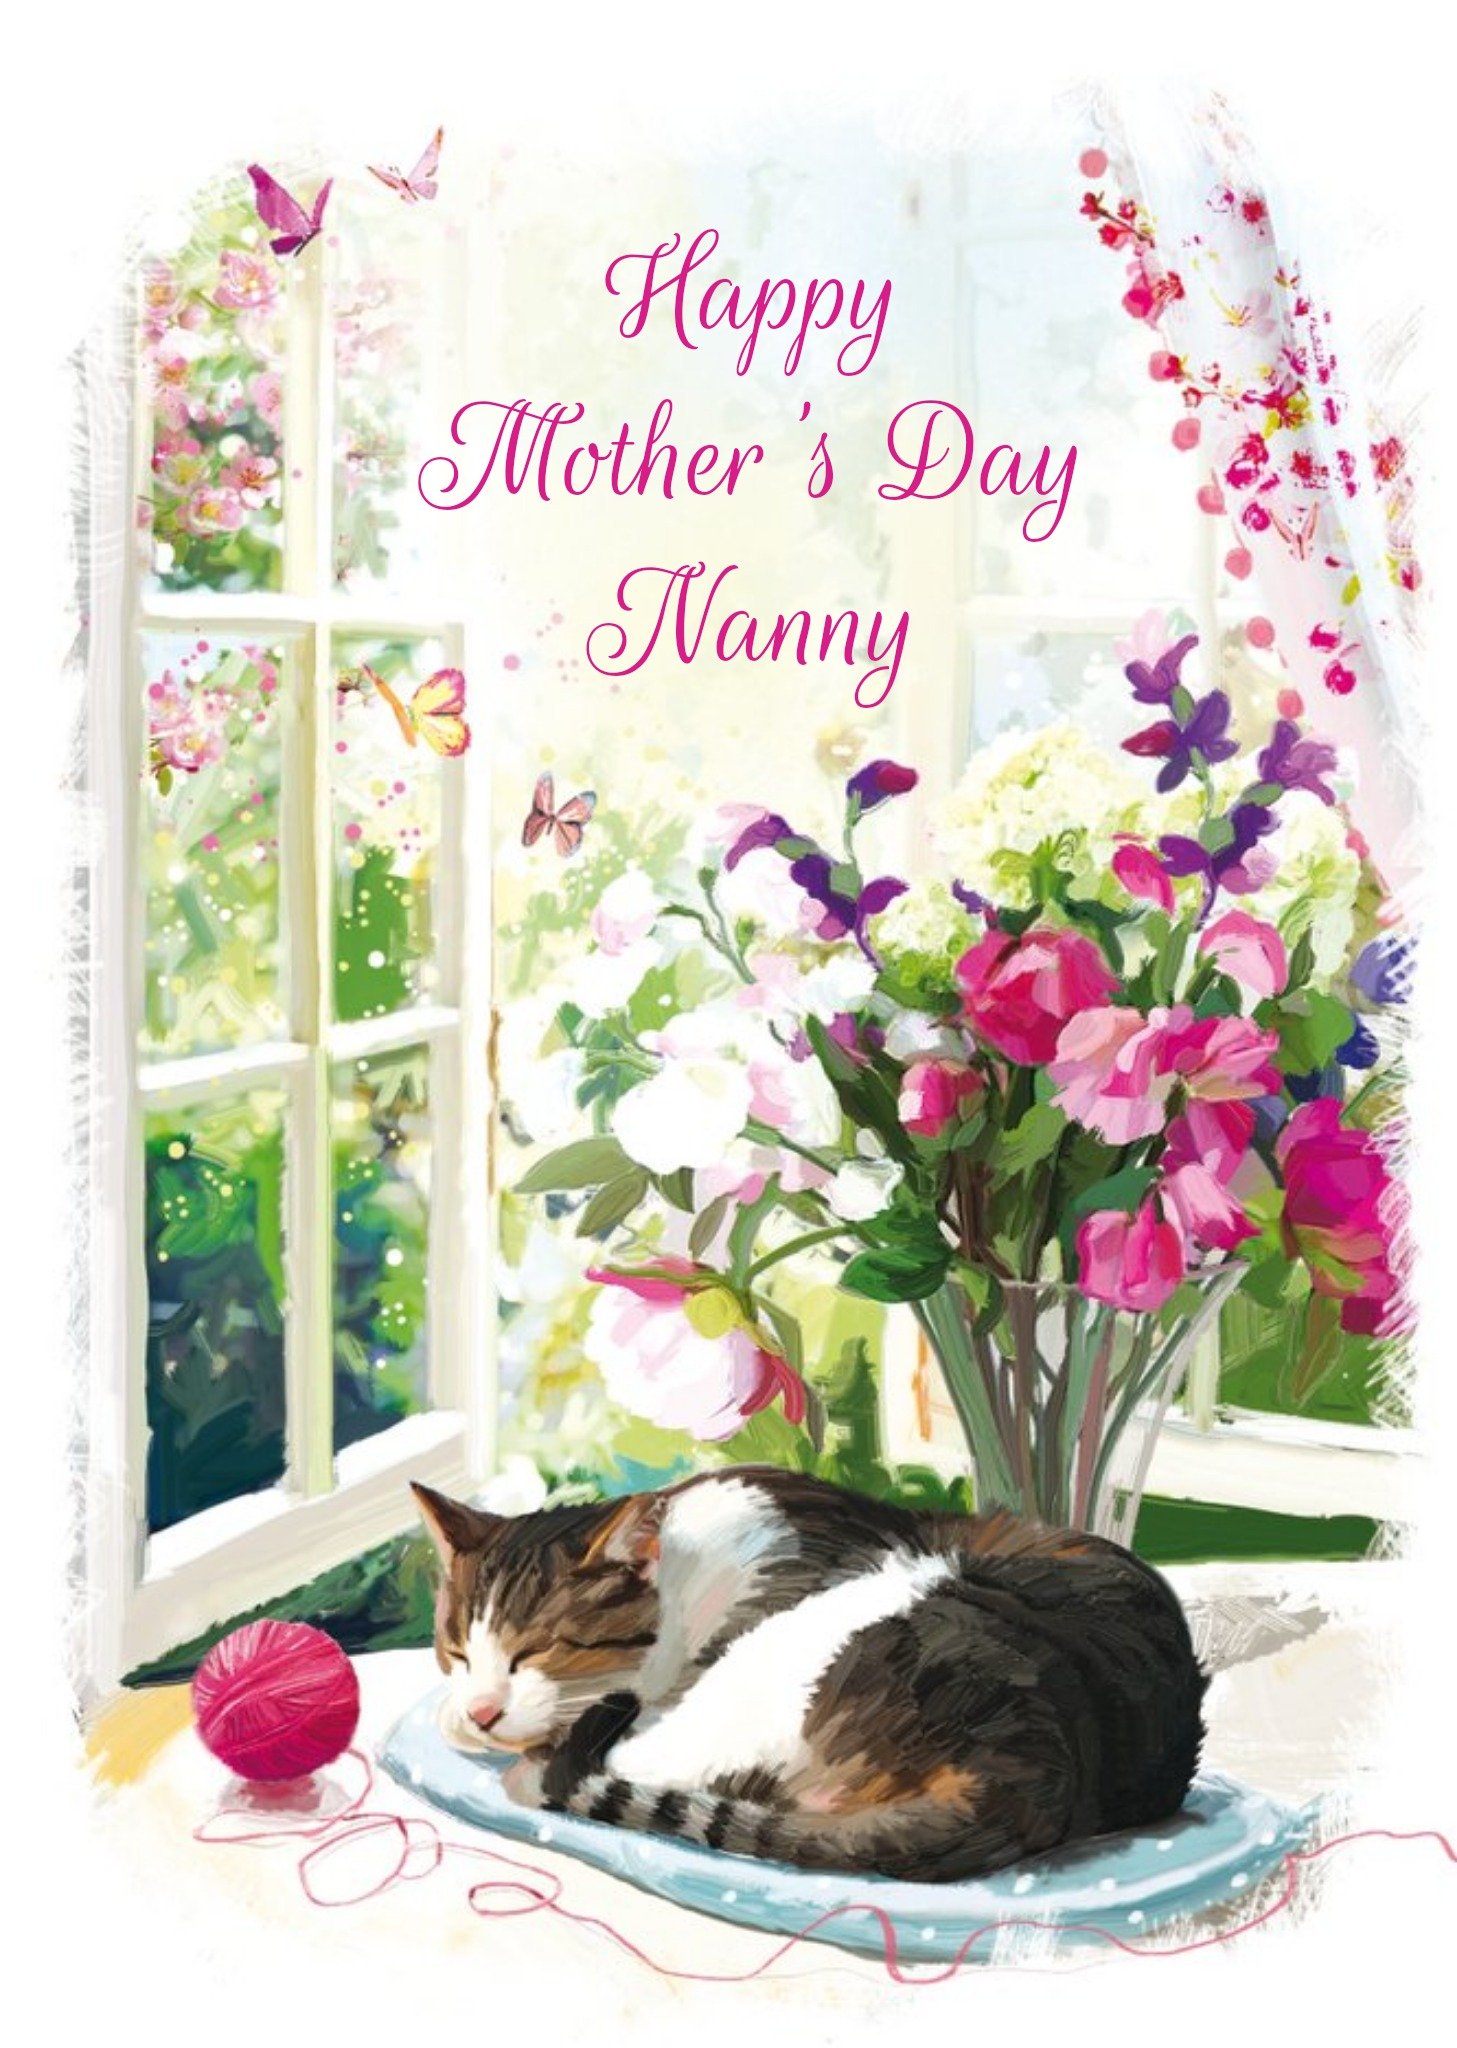 Ling Design Cute Sleeping Cat Personalised Nanny Mother's Day Card Ecard